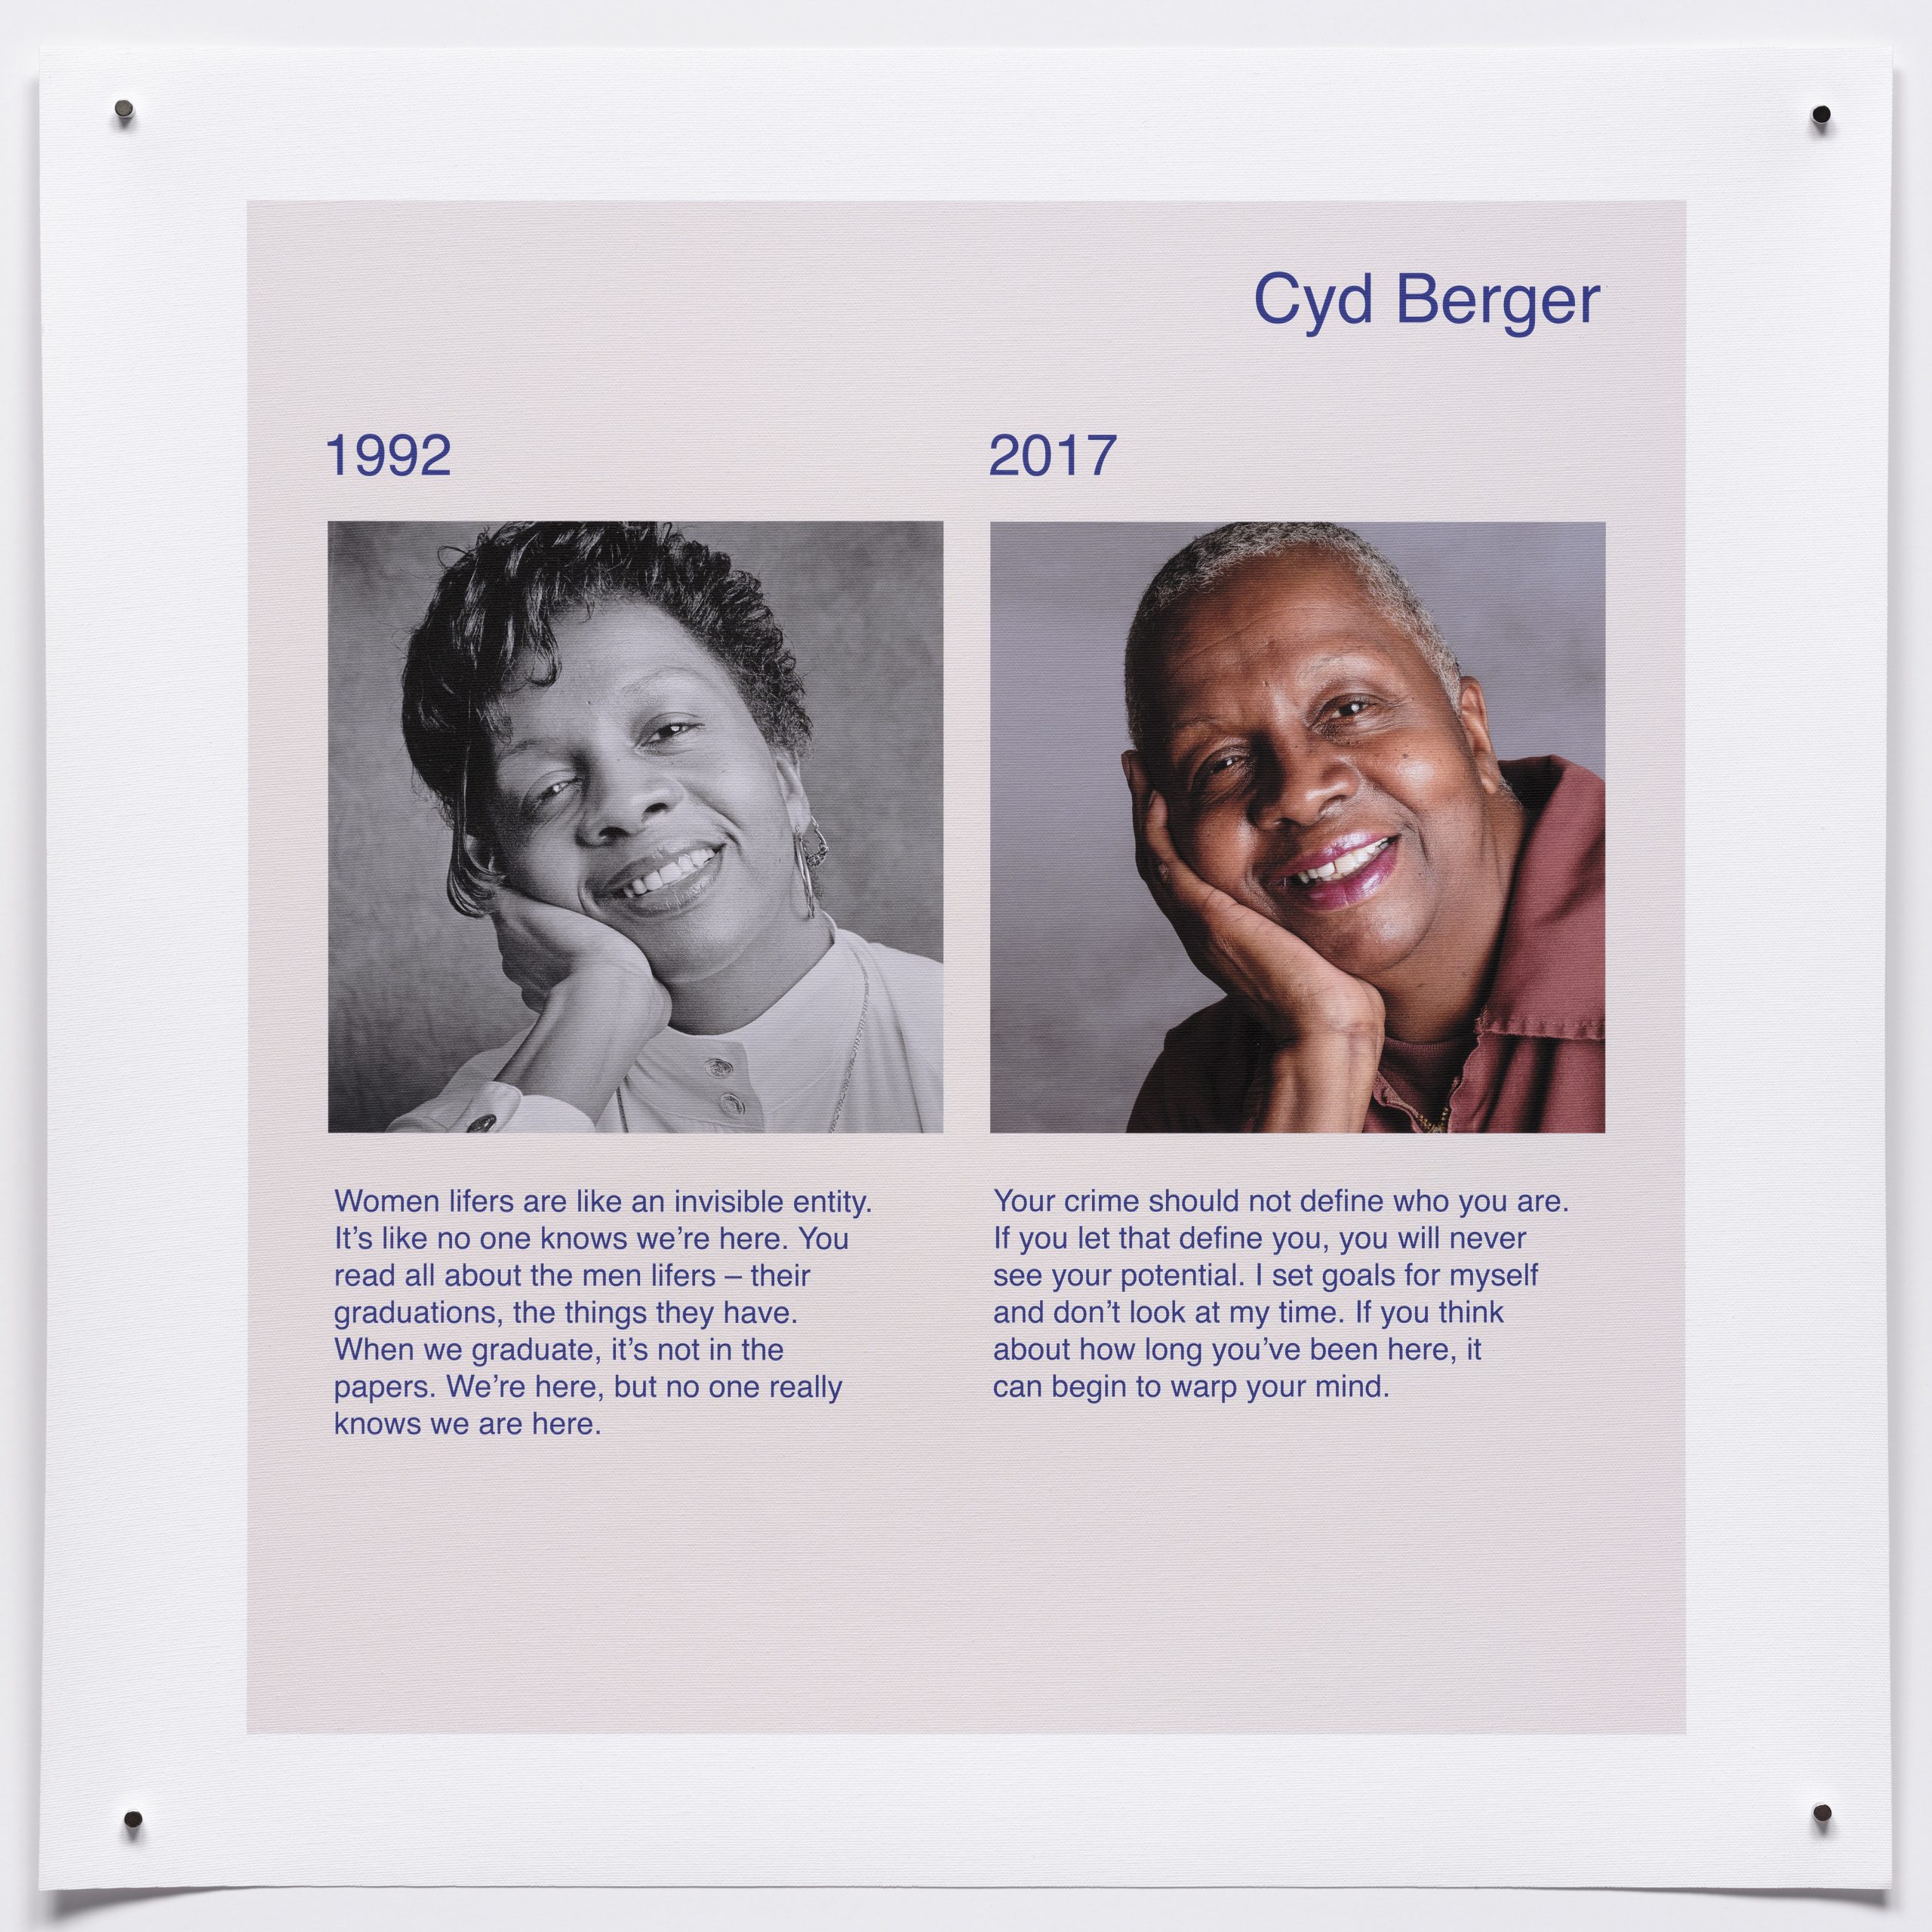 Two photographs side by side of Cyd Berger, taken in 1992 and 2017, one in black and white and the other in color. Berger is Black and in both photos she is smiling warmly, head against her hand. Text statements appear beneath each photo.